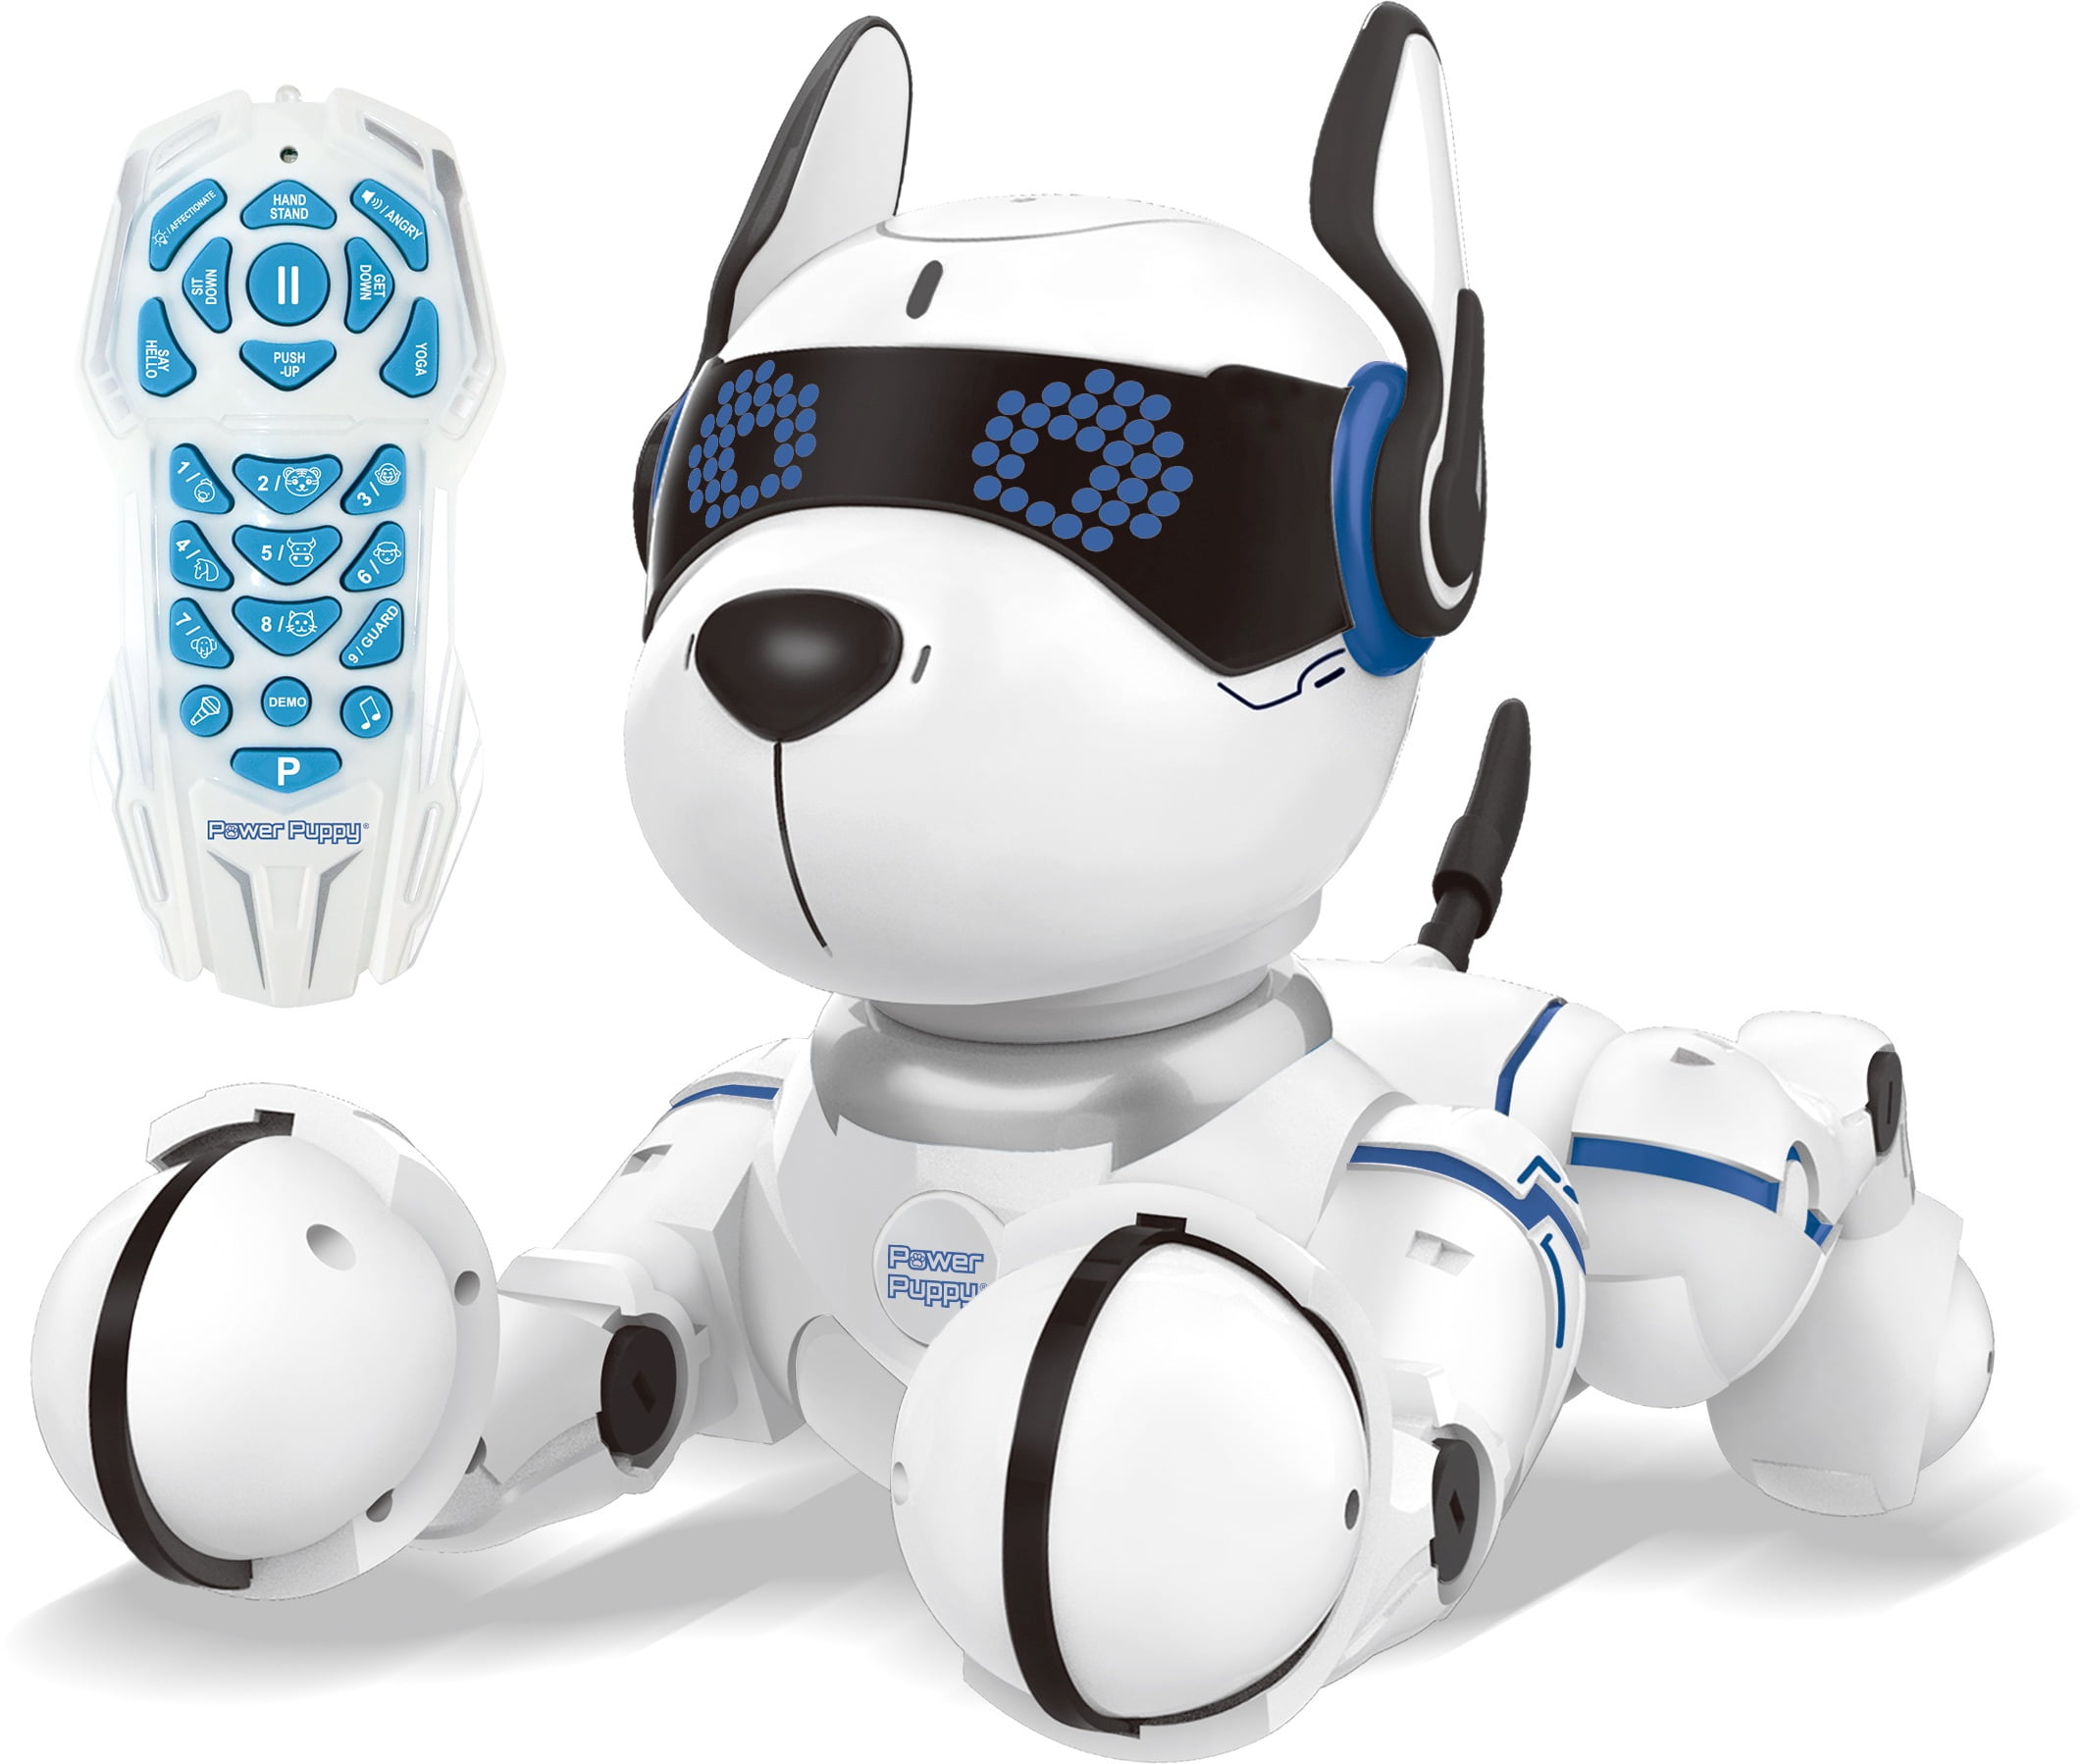 Power Puppy Robot Dog *No1 Christmas Toy!* - Celtic Competitions